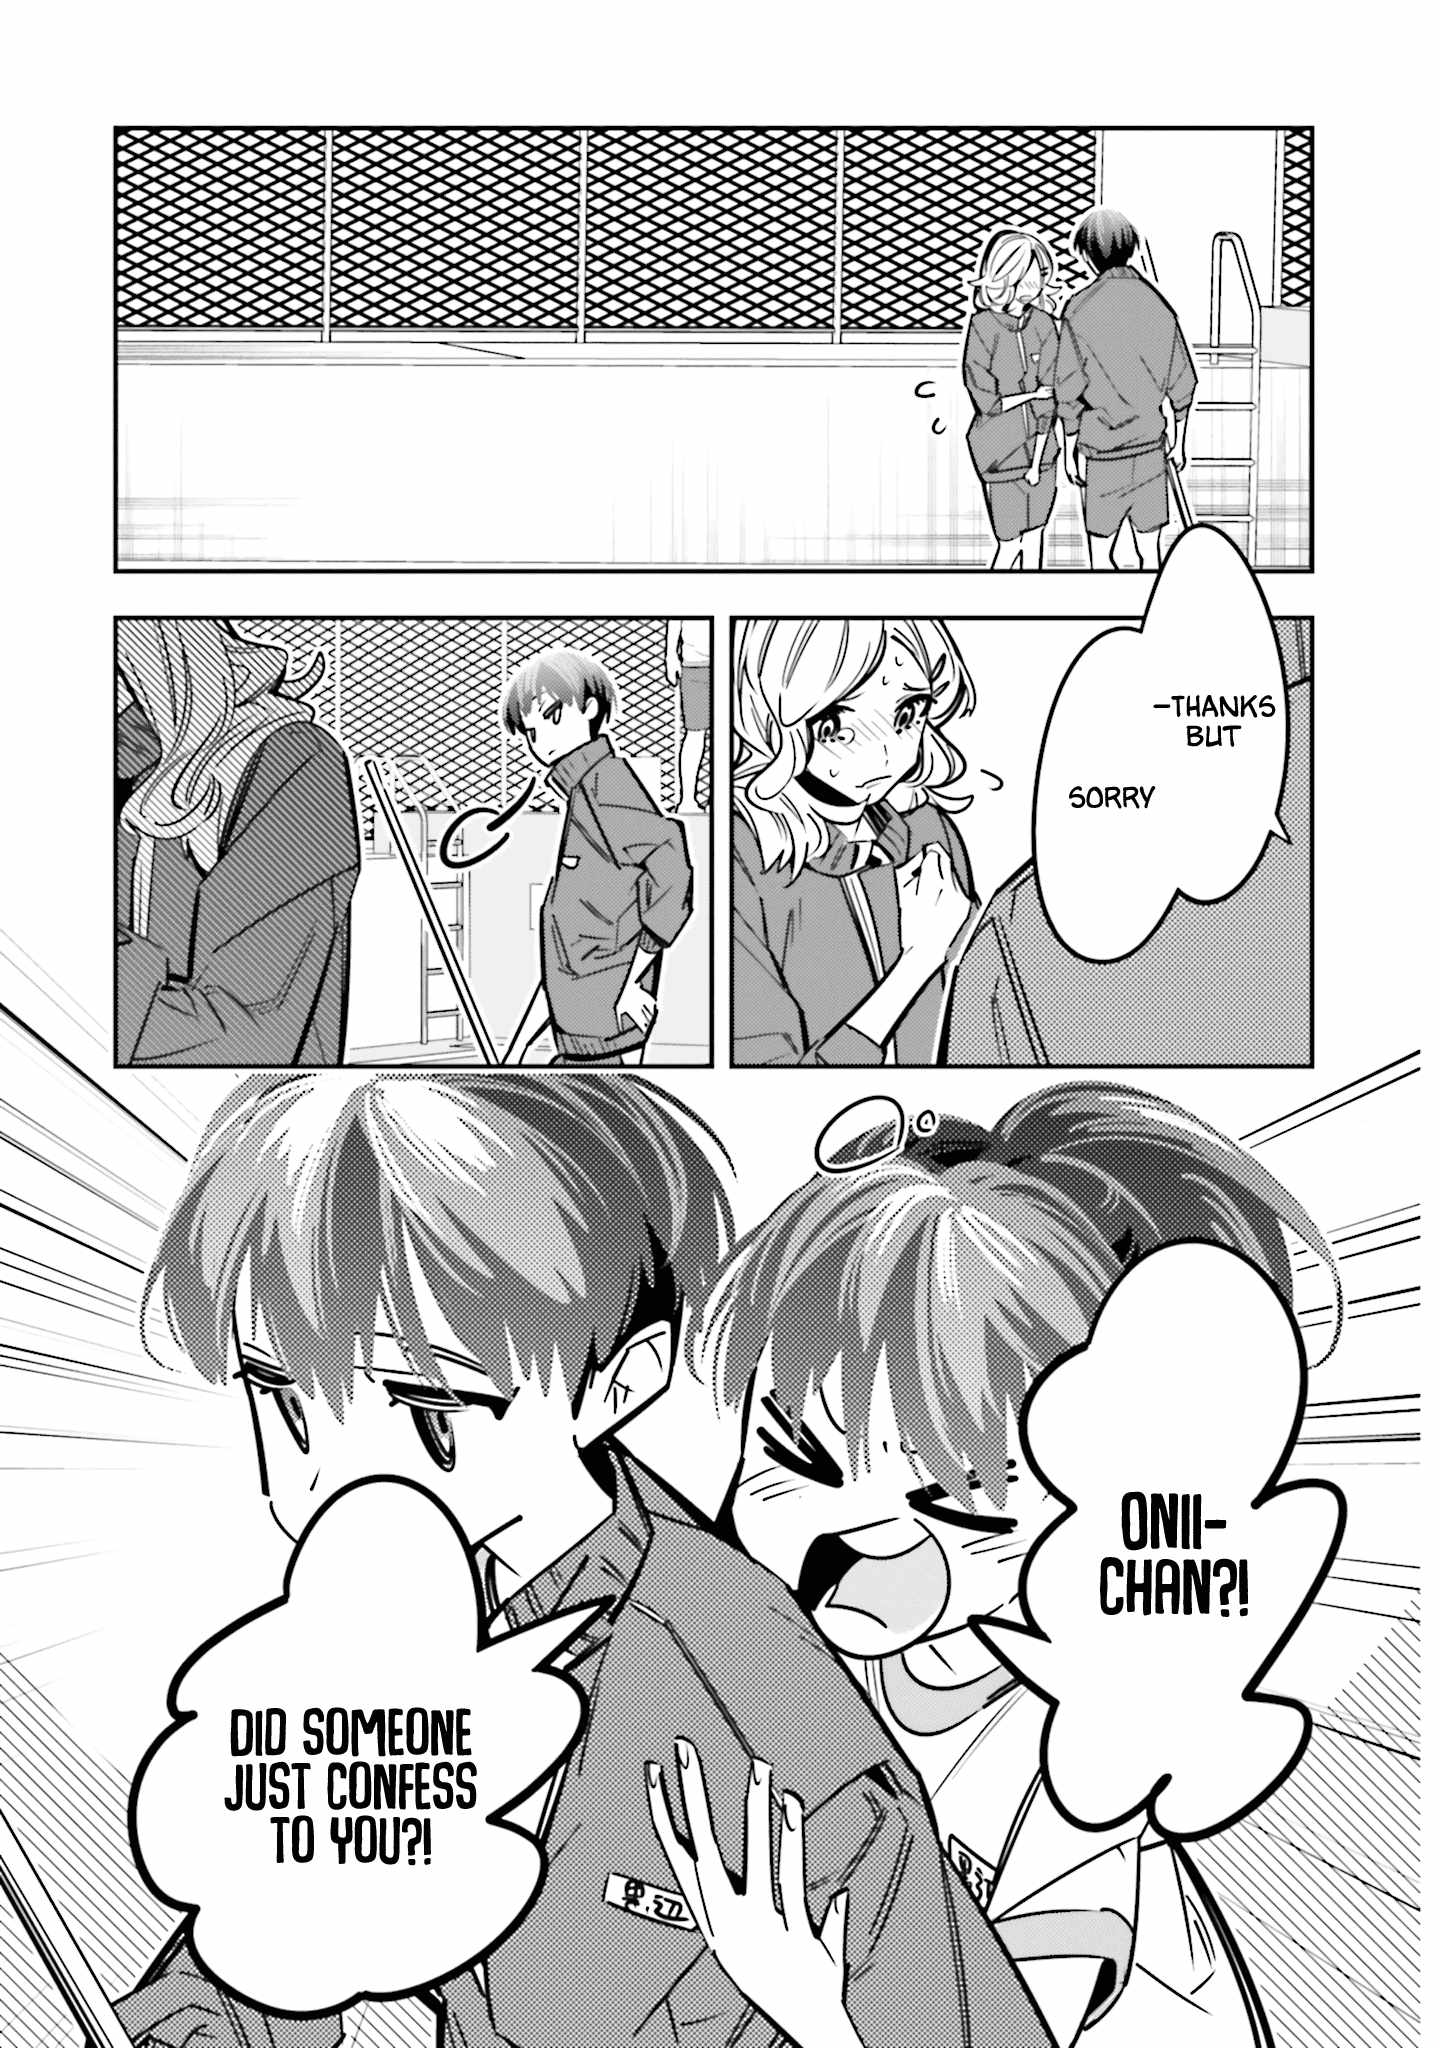 I Reincarnated as the Little Sister of a Death Game Manga's Murd3r Mastermind and Failed Chapter 13-5-eng-li - Page 2